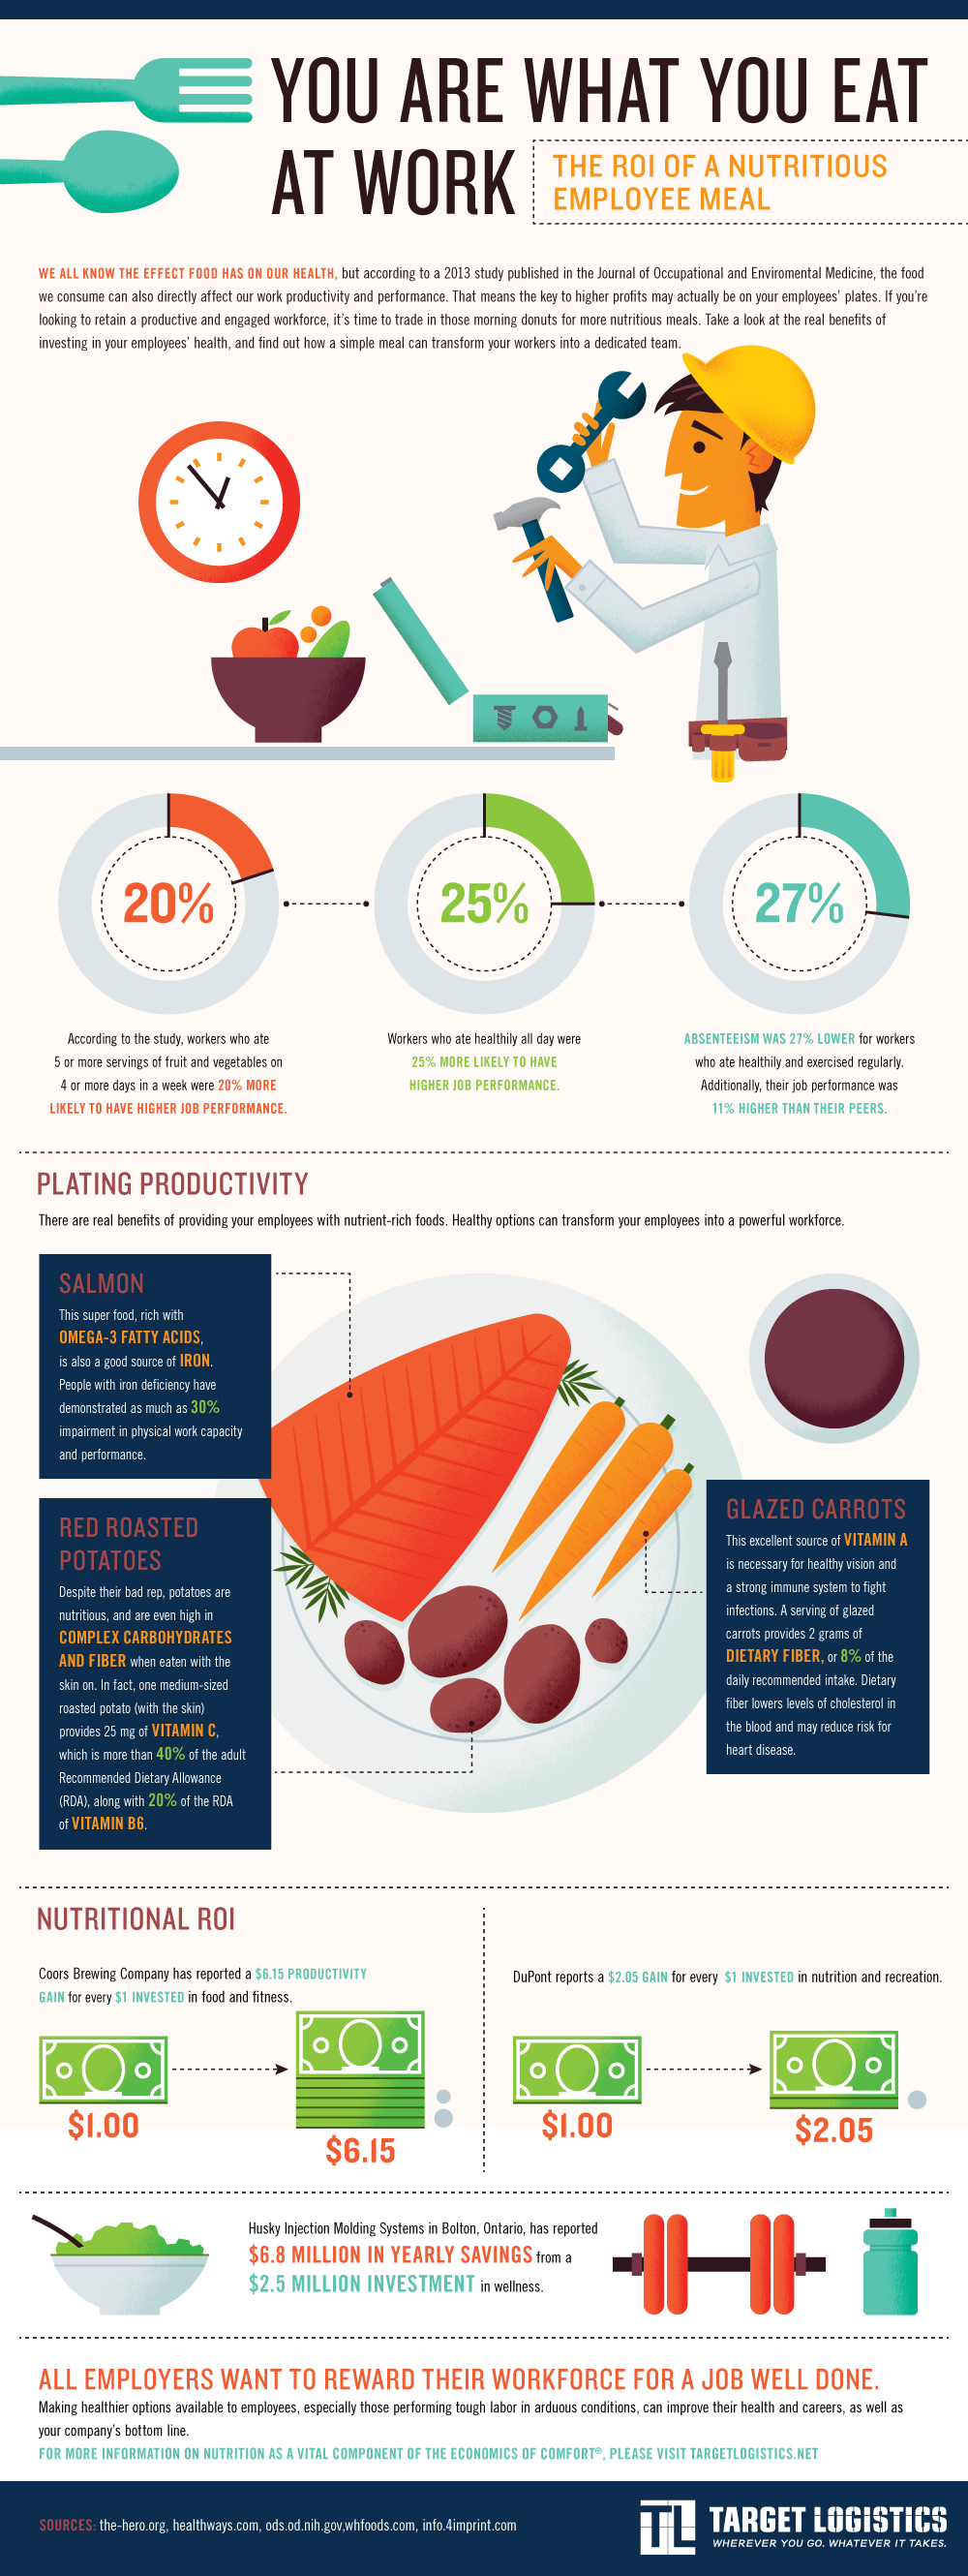 You are what you eat at work (Infographic)